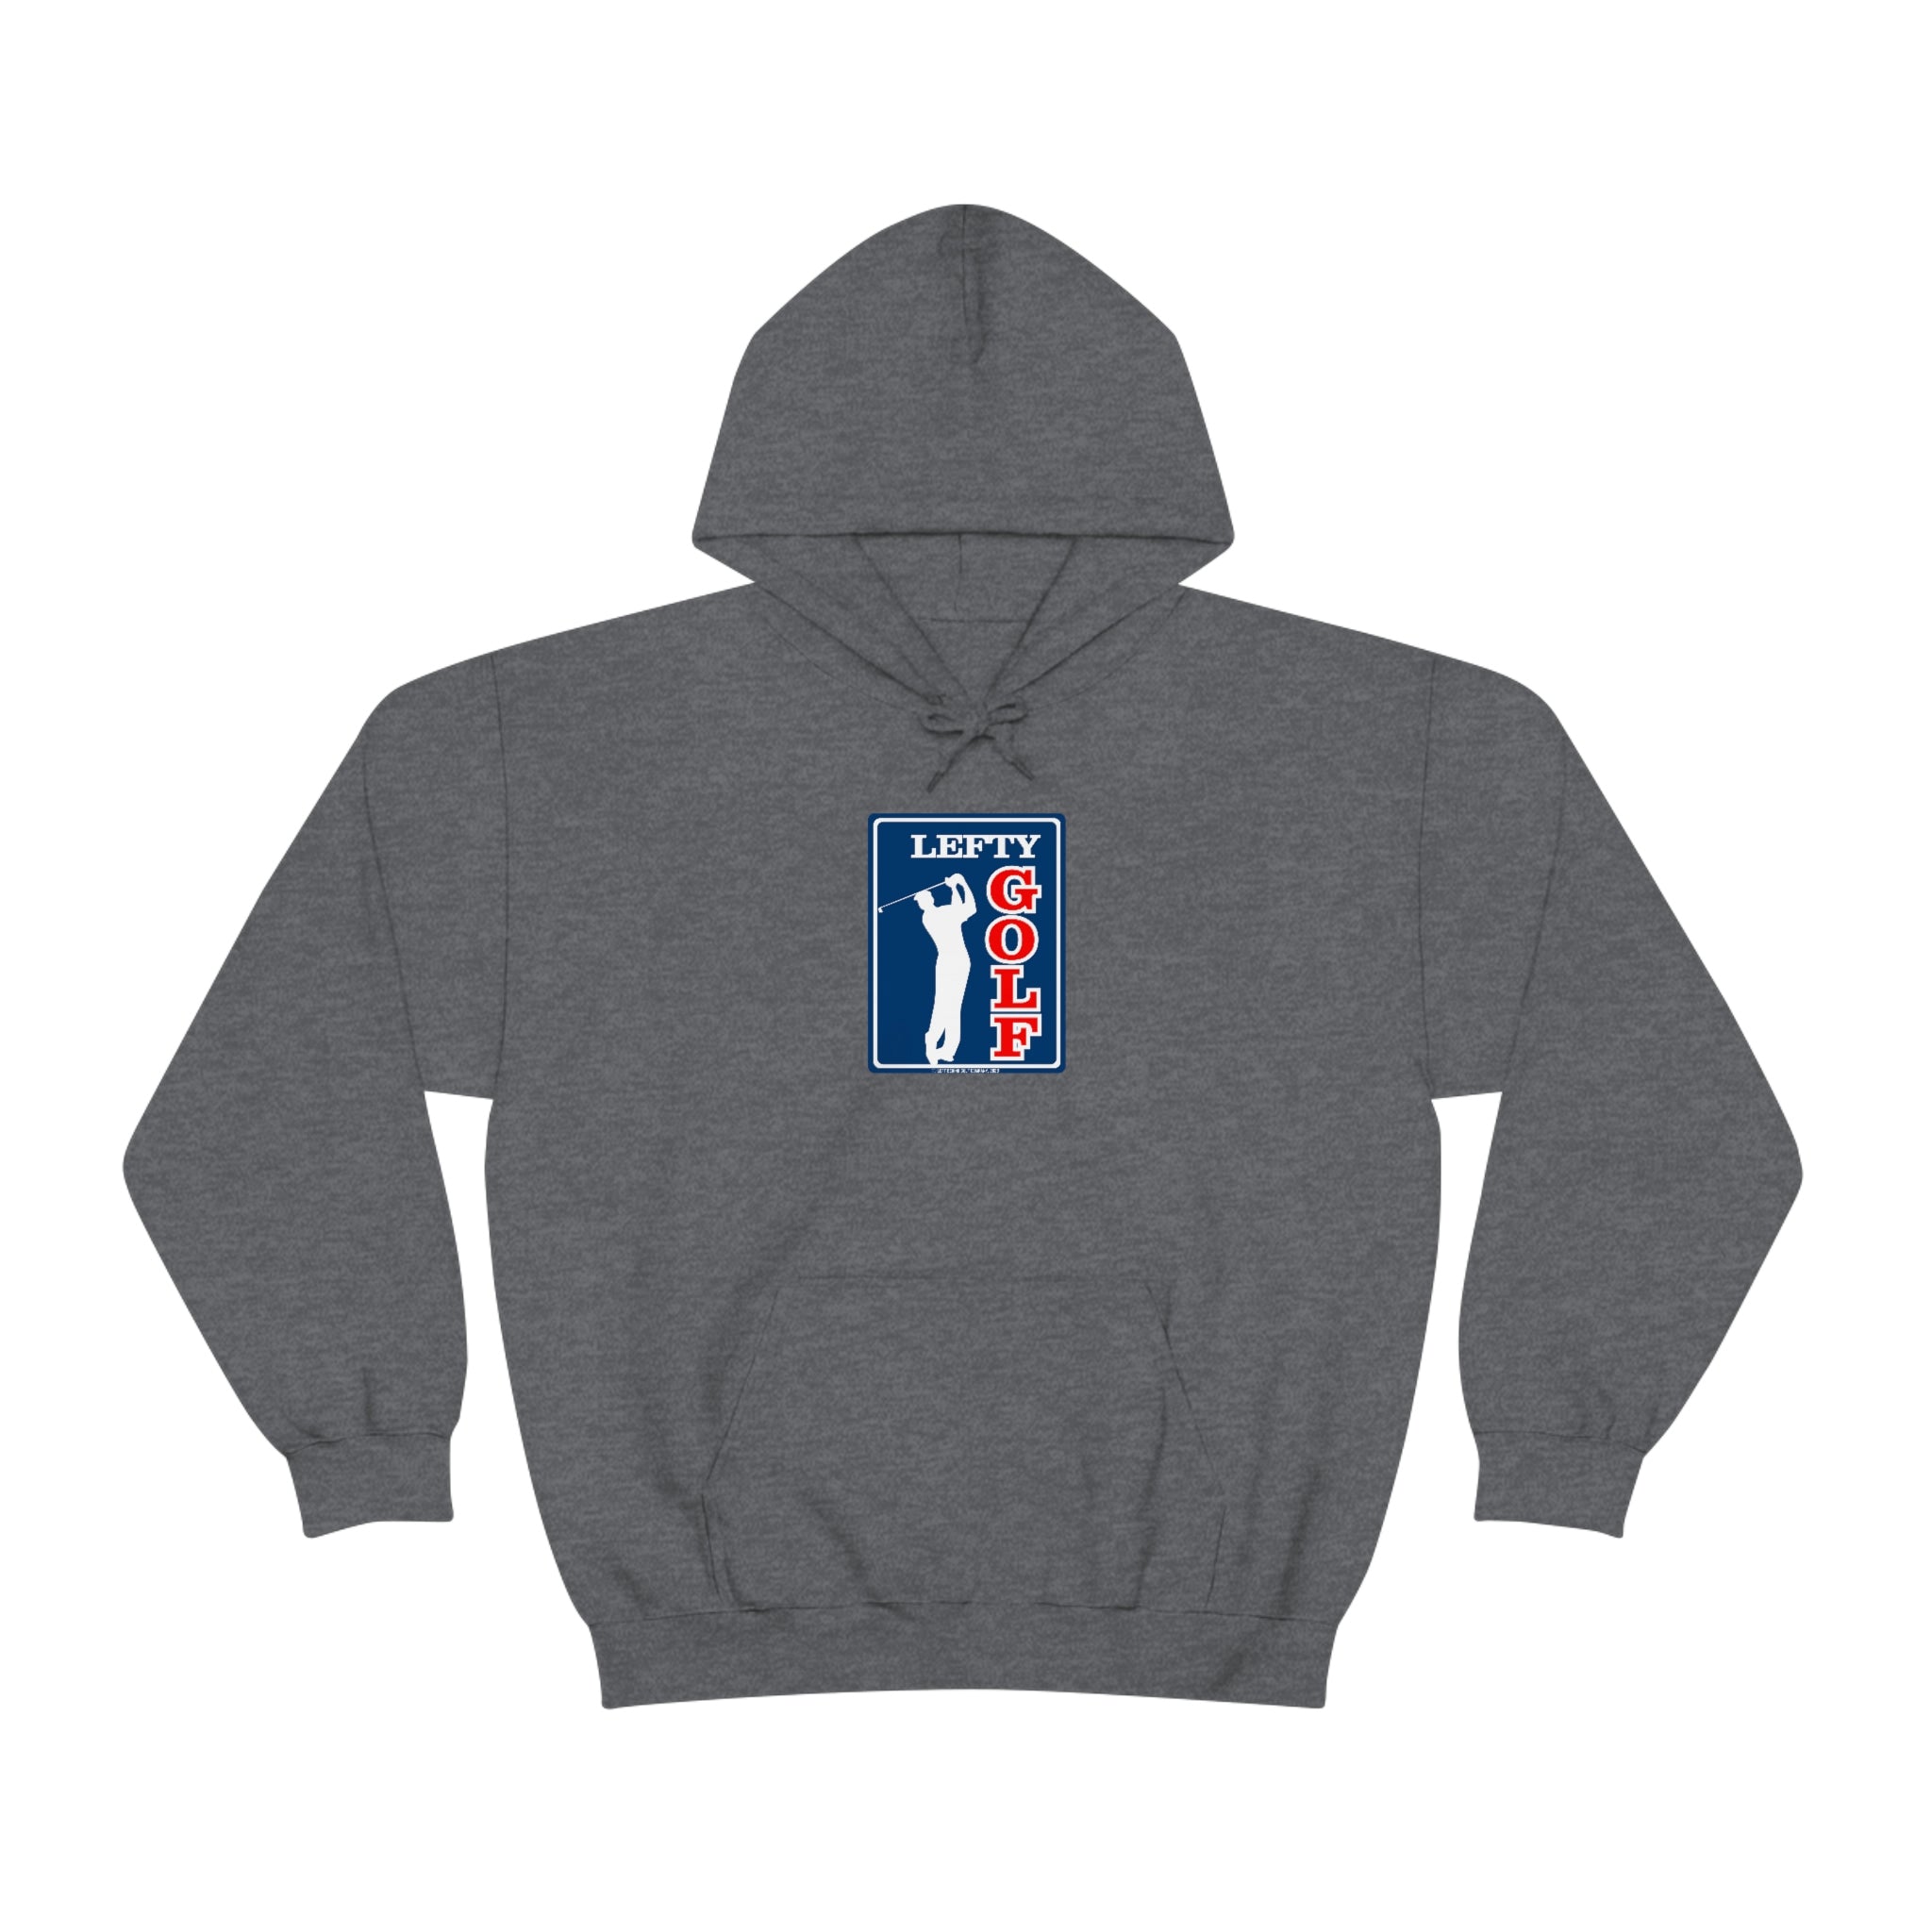 LEFTY Golf Tour Hoodie (Navy/White/Red)